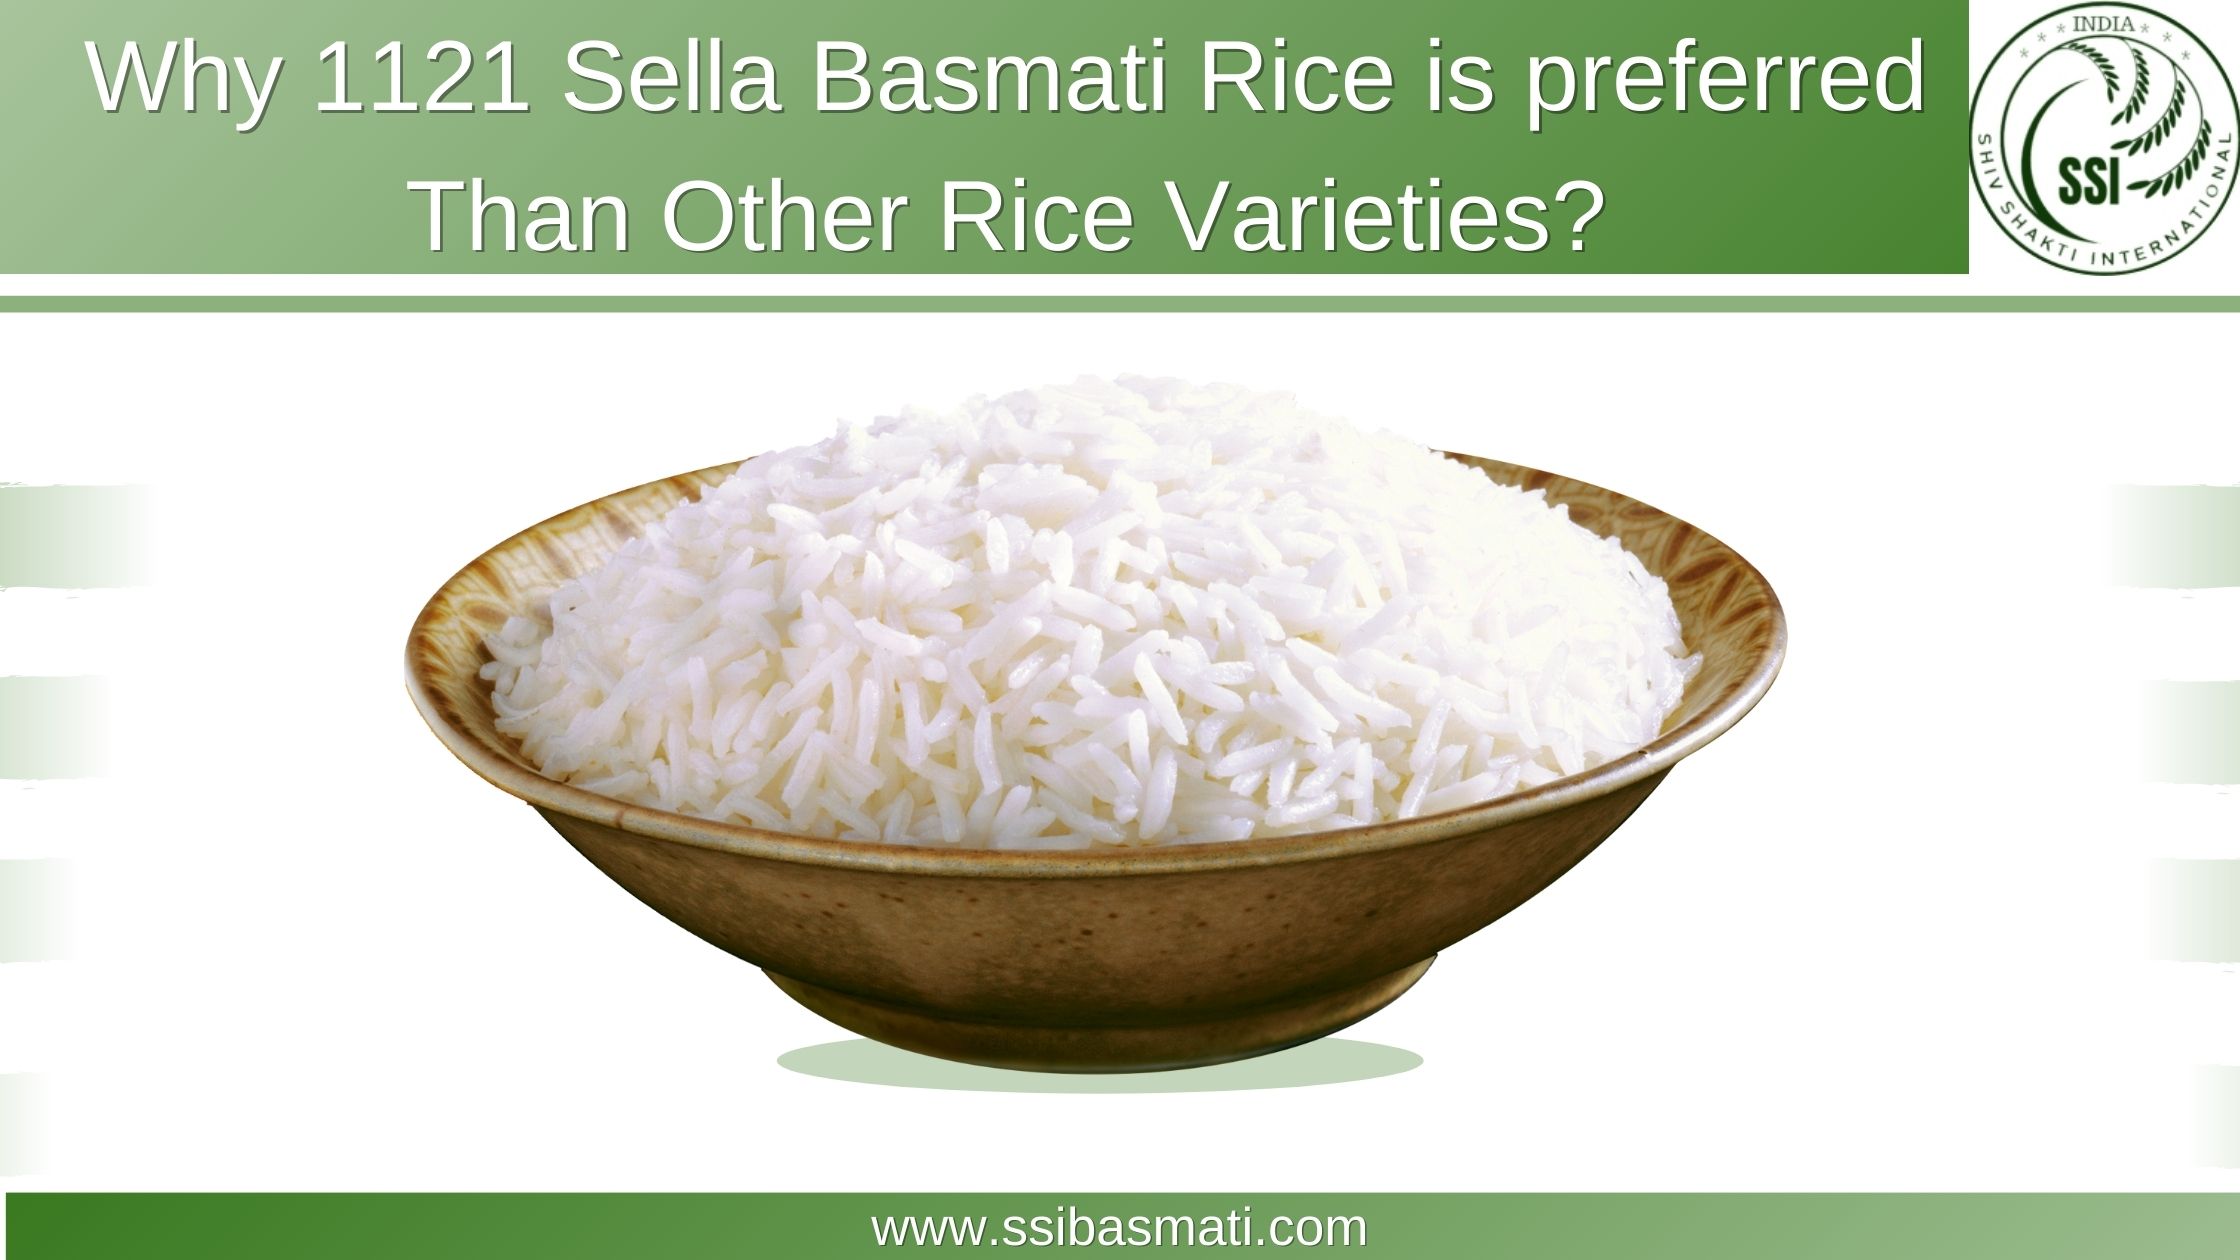 Why 1121 Sella Basmati Rice is preferred Than Other Rice Varieties?